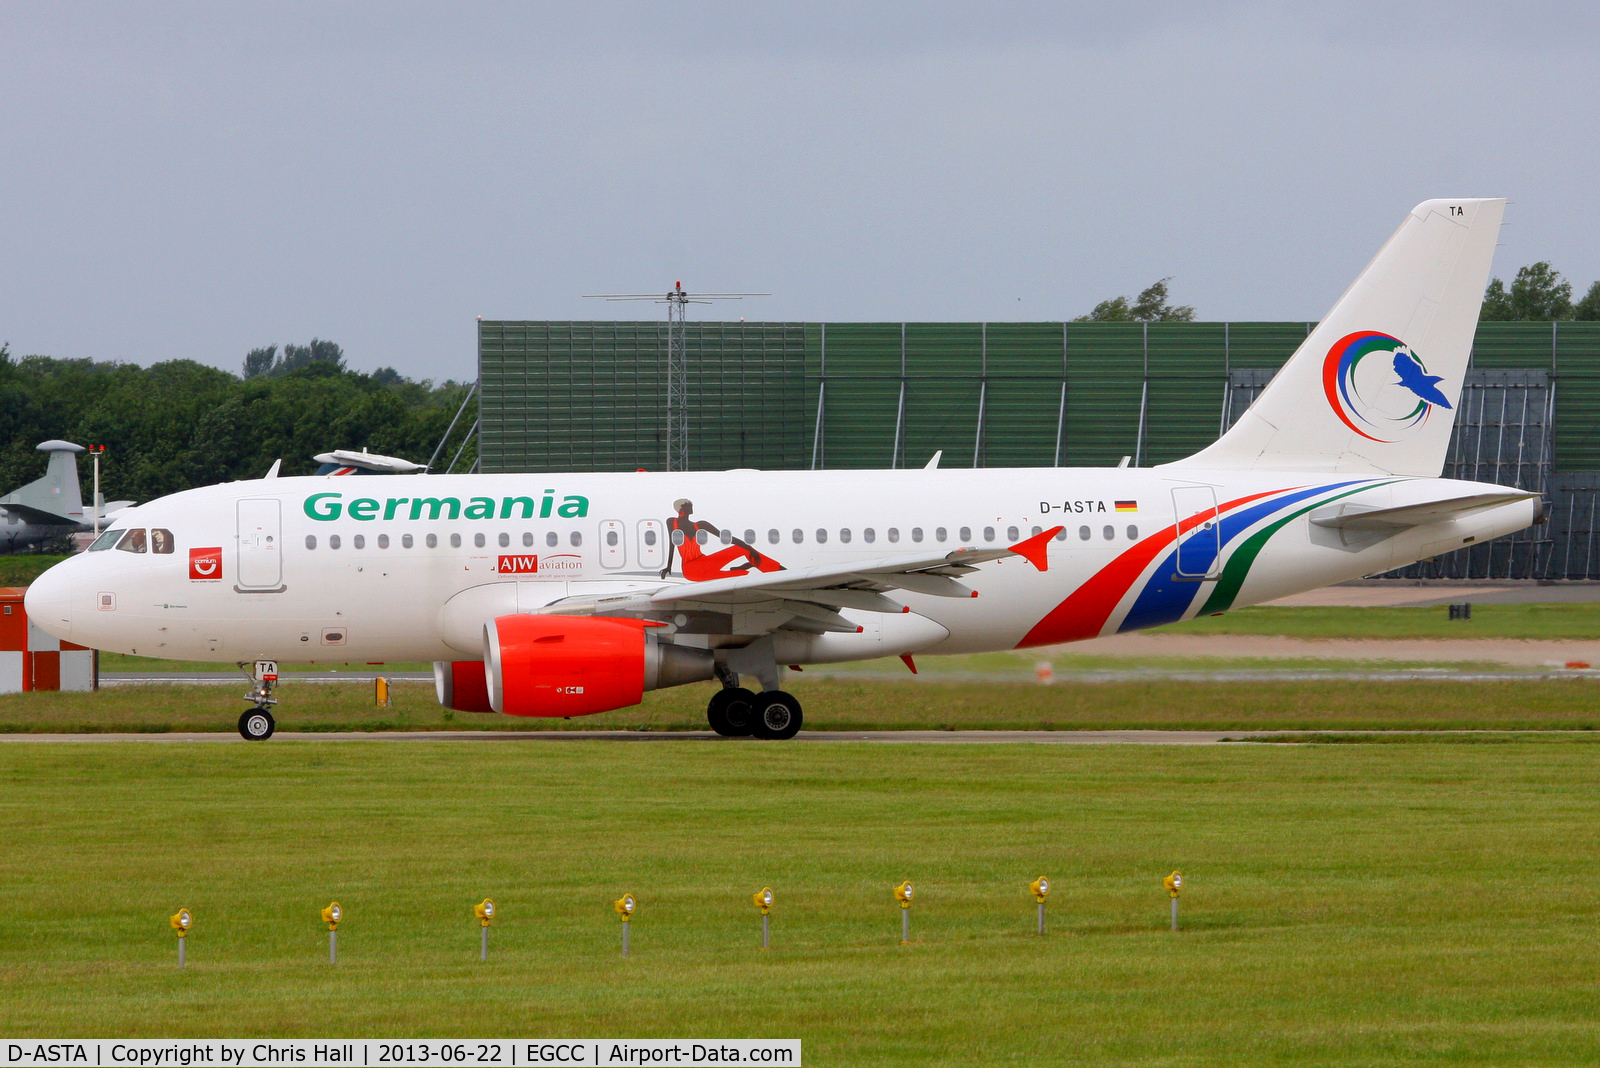 D-ASTA, 2011 Airbus A319-112 C/N 4663, now with Germania titles